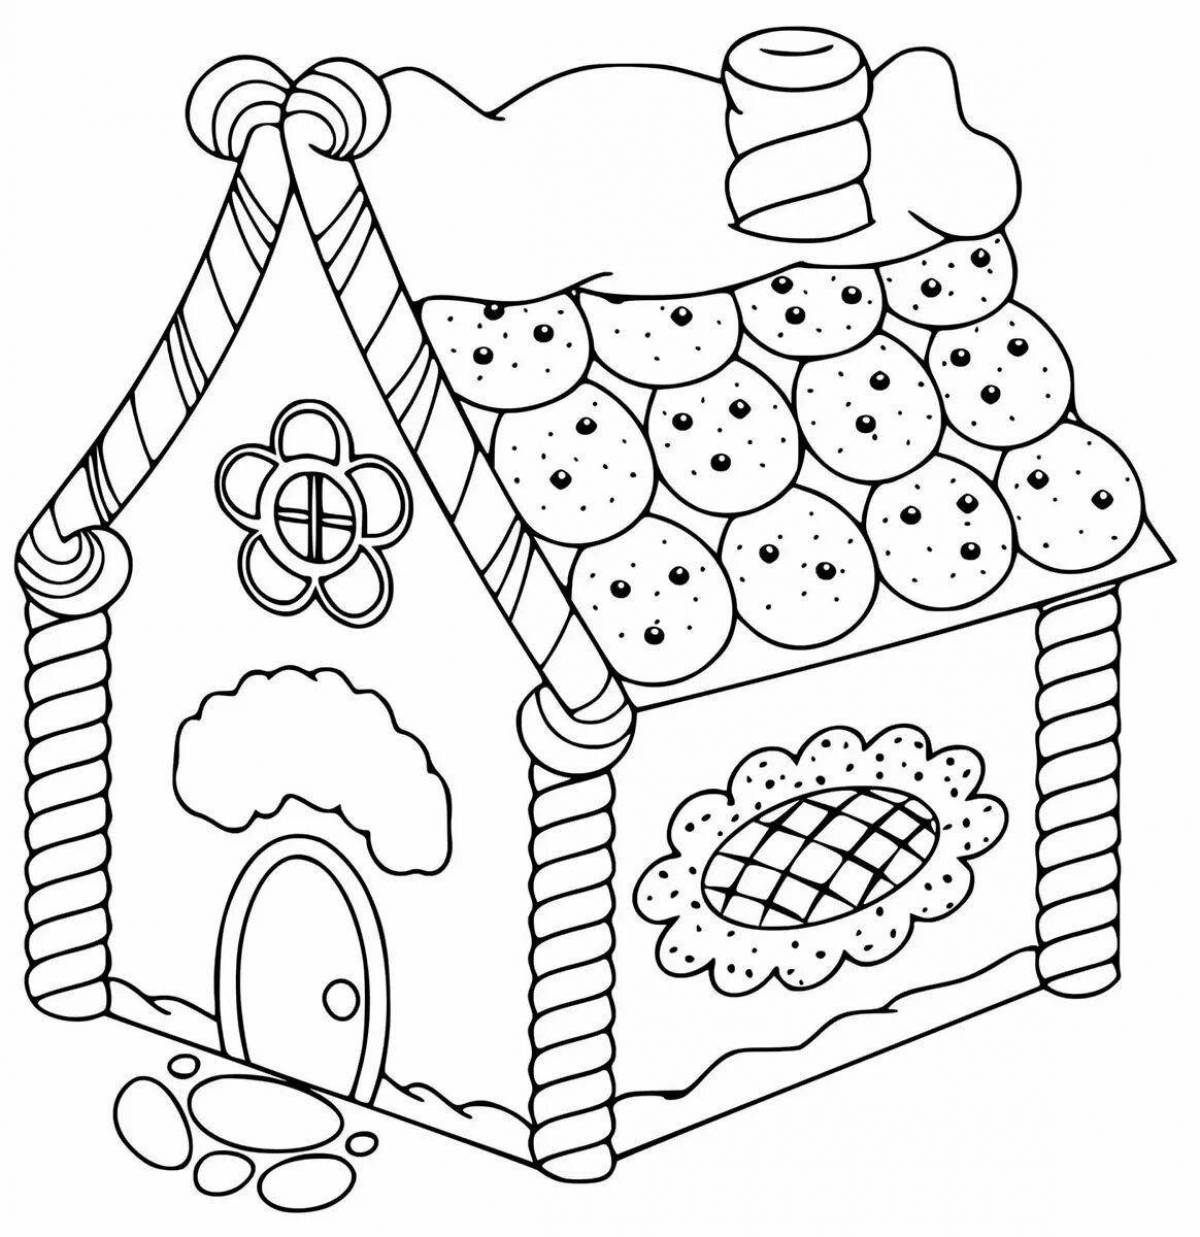 Adorable gingerbread house coloring book